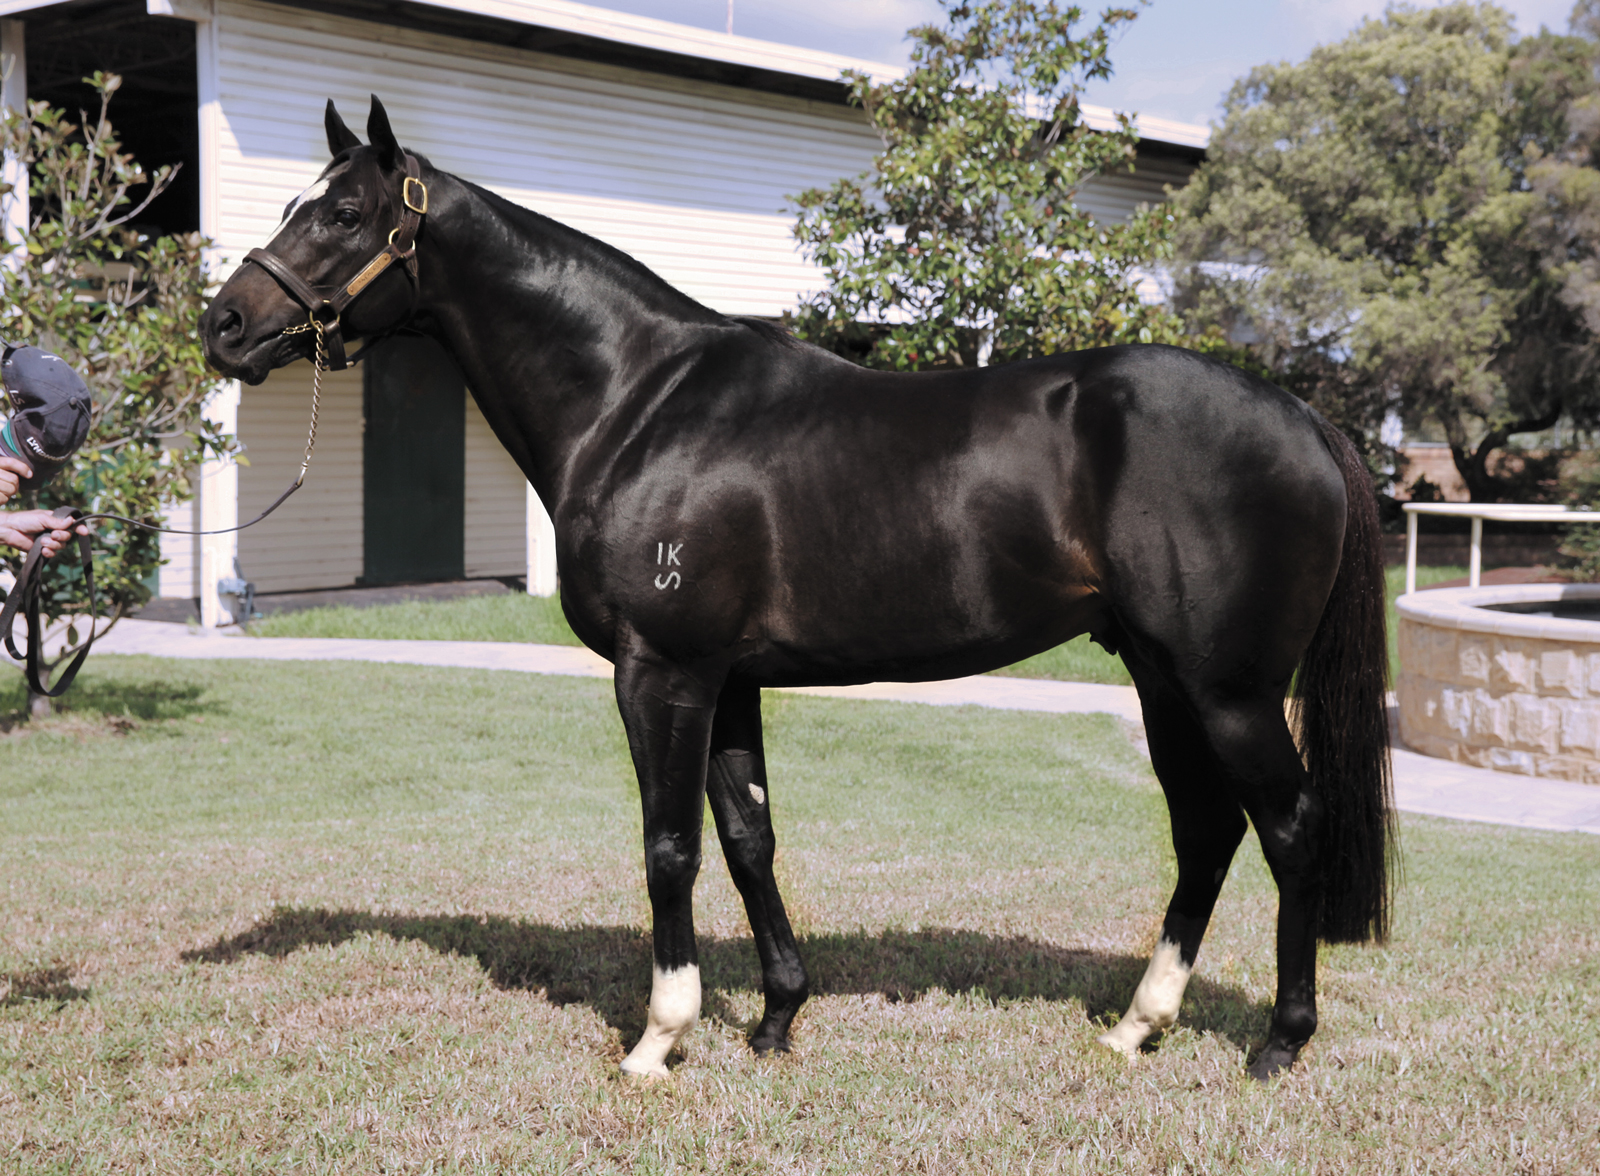 Better Than Ready: the son of More Than Ready has big shoes to fill at Lyndhurst Stud, which has a long history of record-breaking stallions